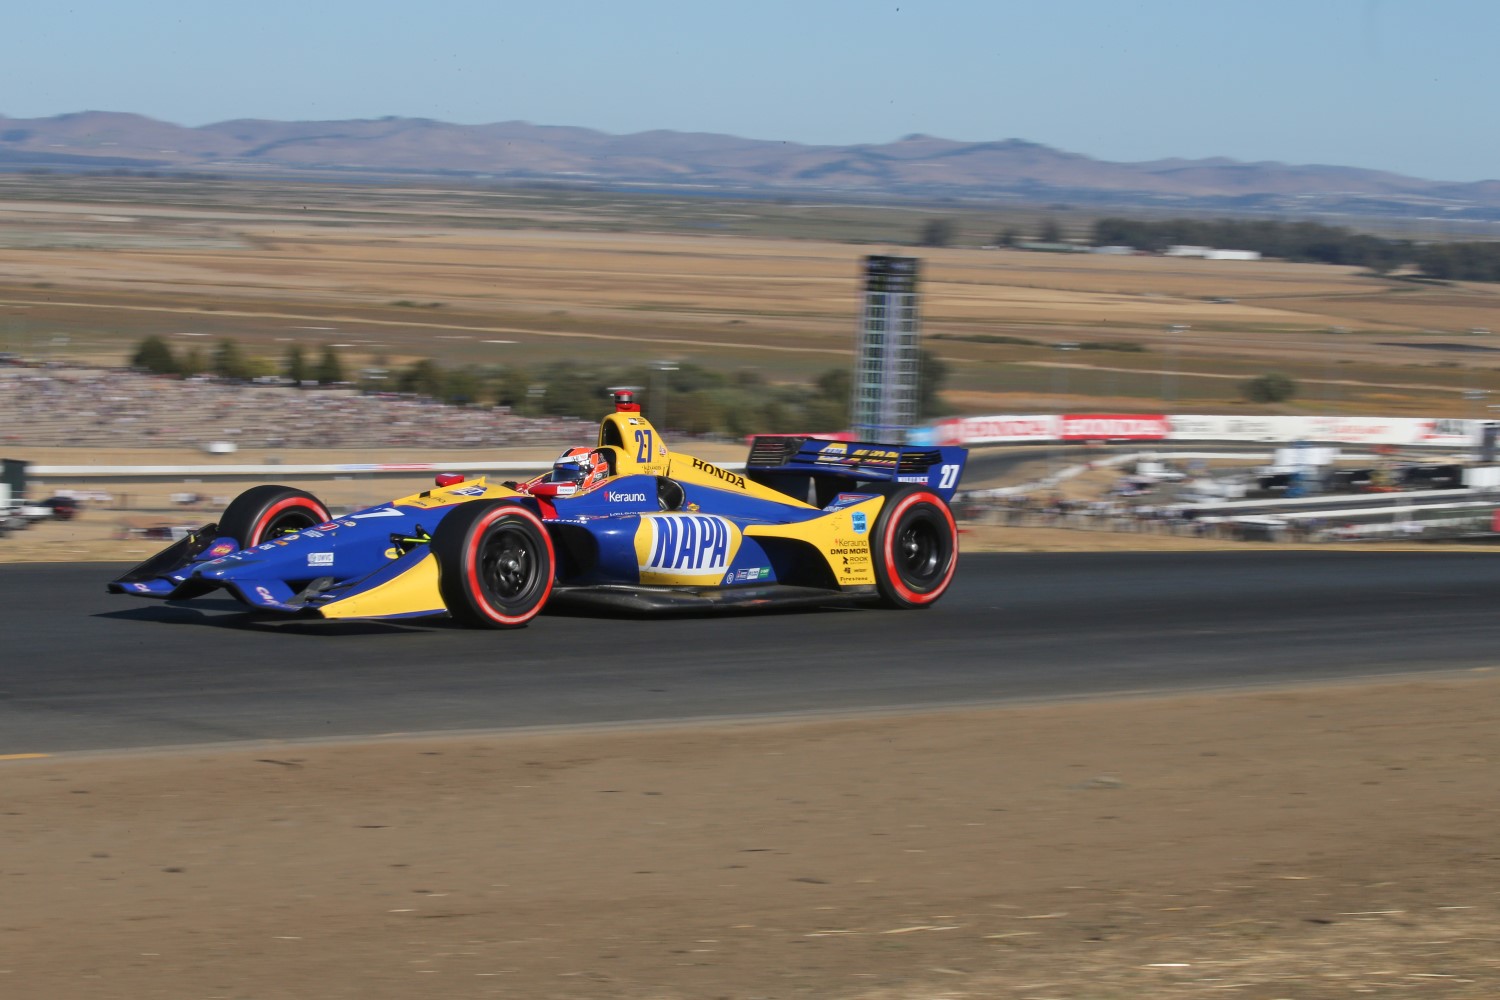 Alexander Rossi races before scarce crowd